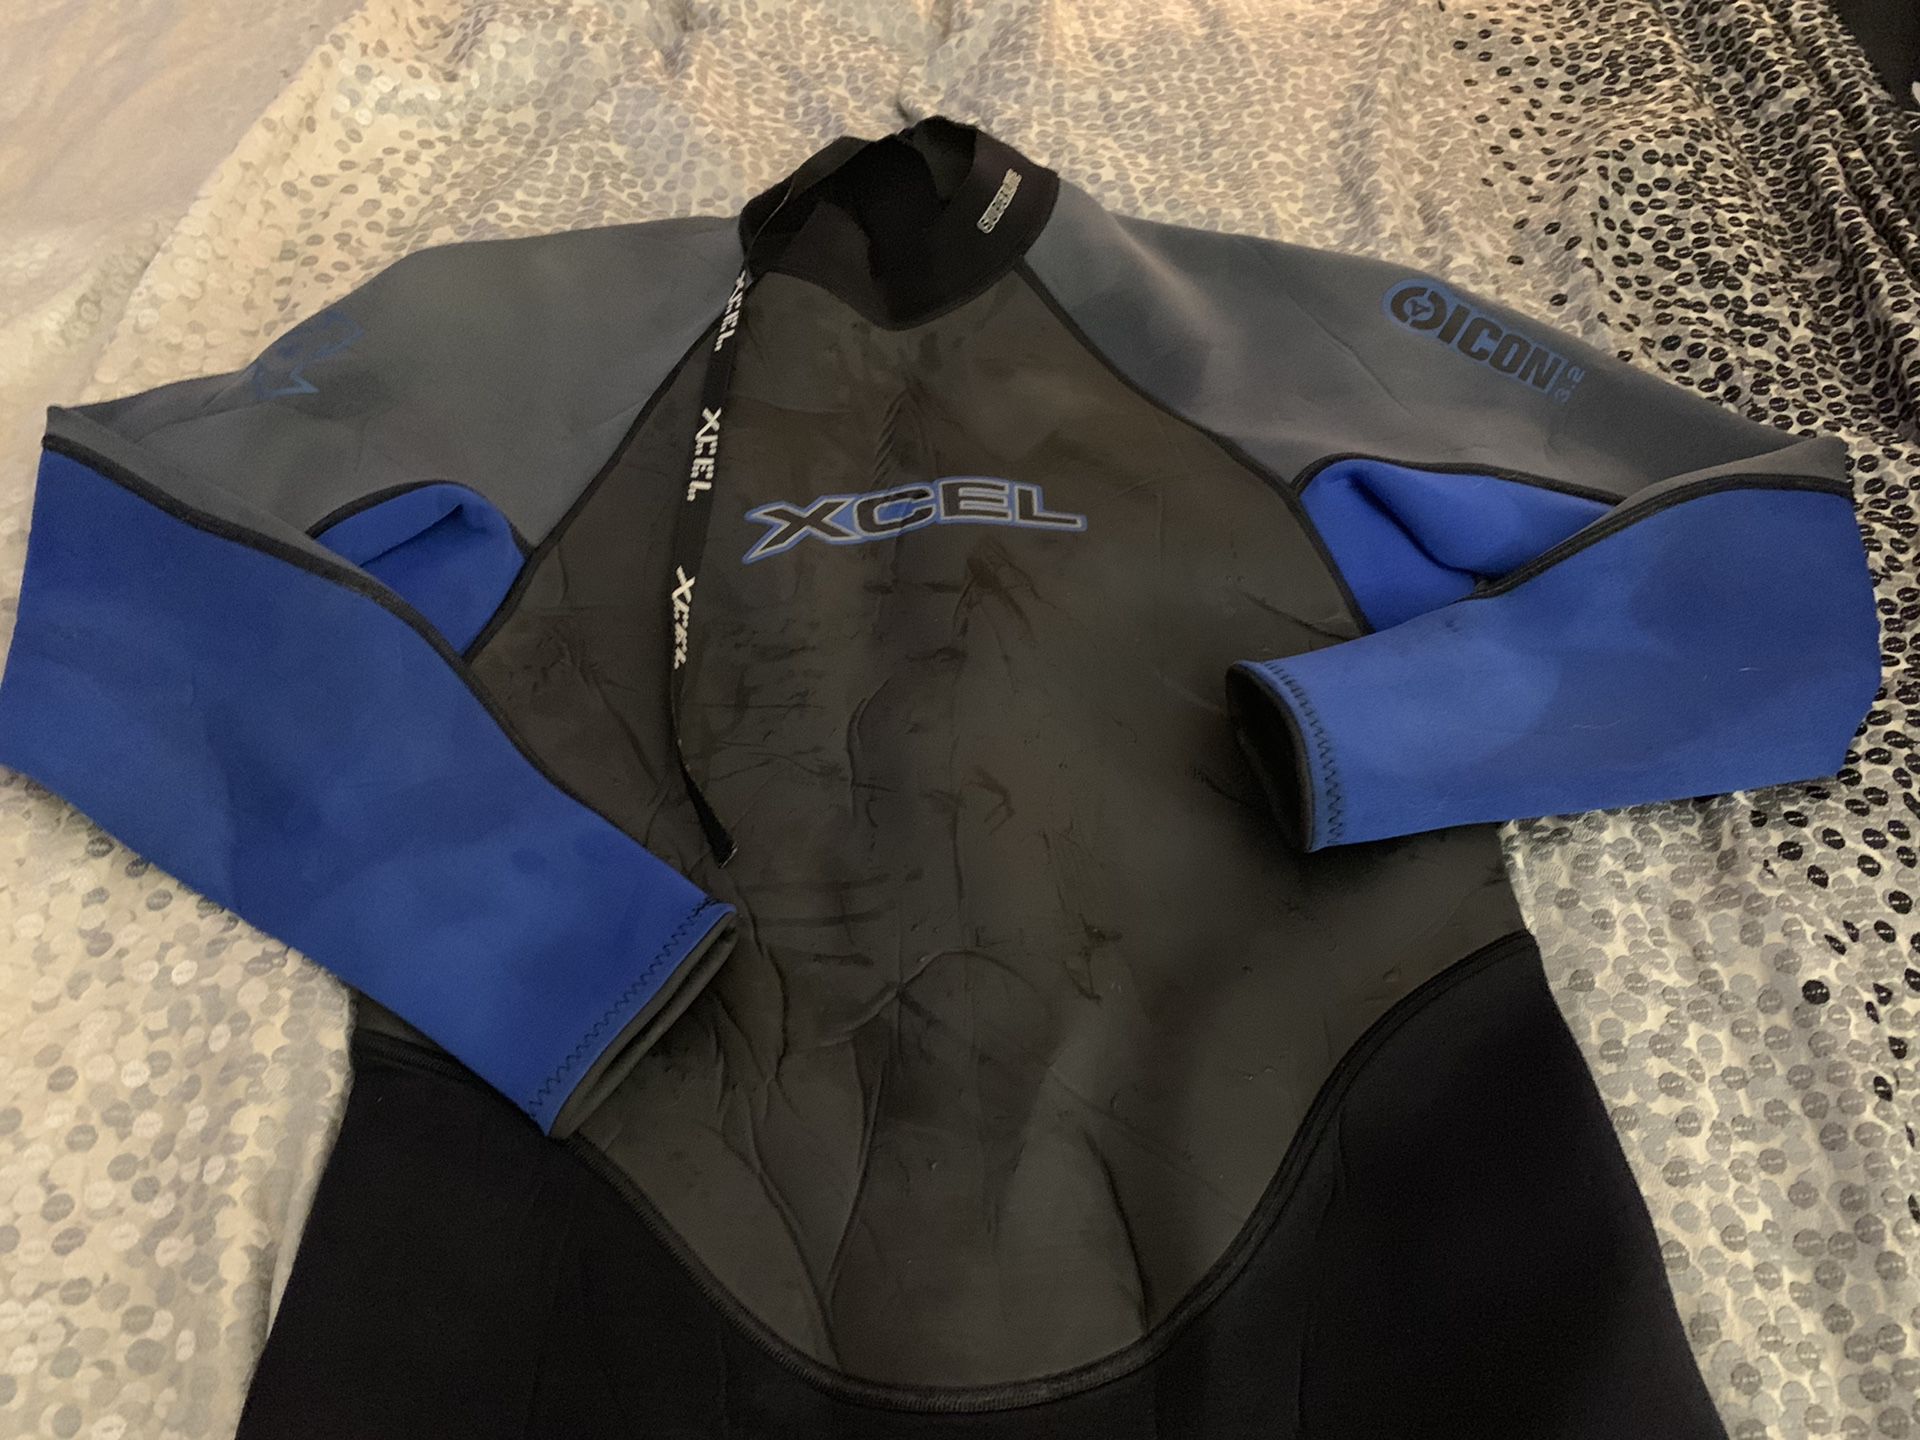 Xcel icon 3.2 wetsuit worn 3 times